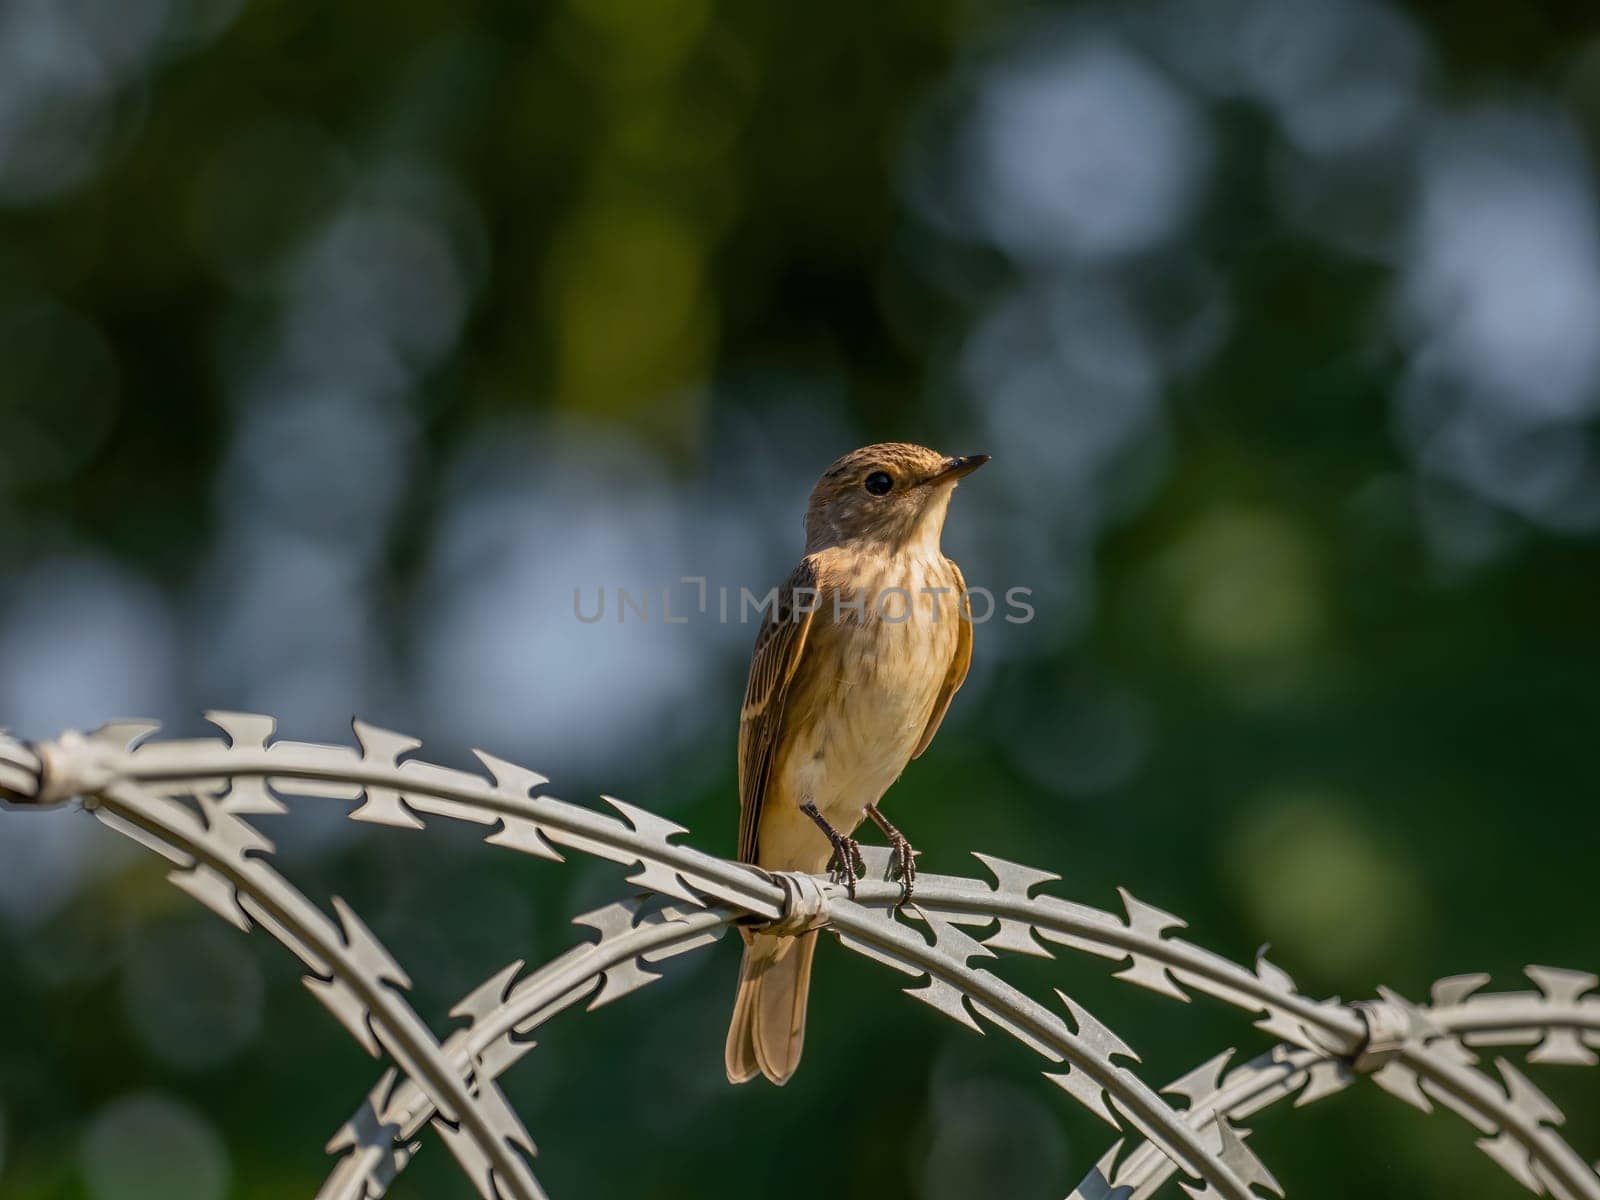 Spotted flycatcher sitting on a chain, smudged greenery in the background.Wildlife photo!